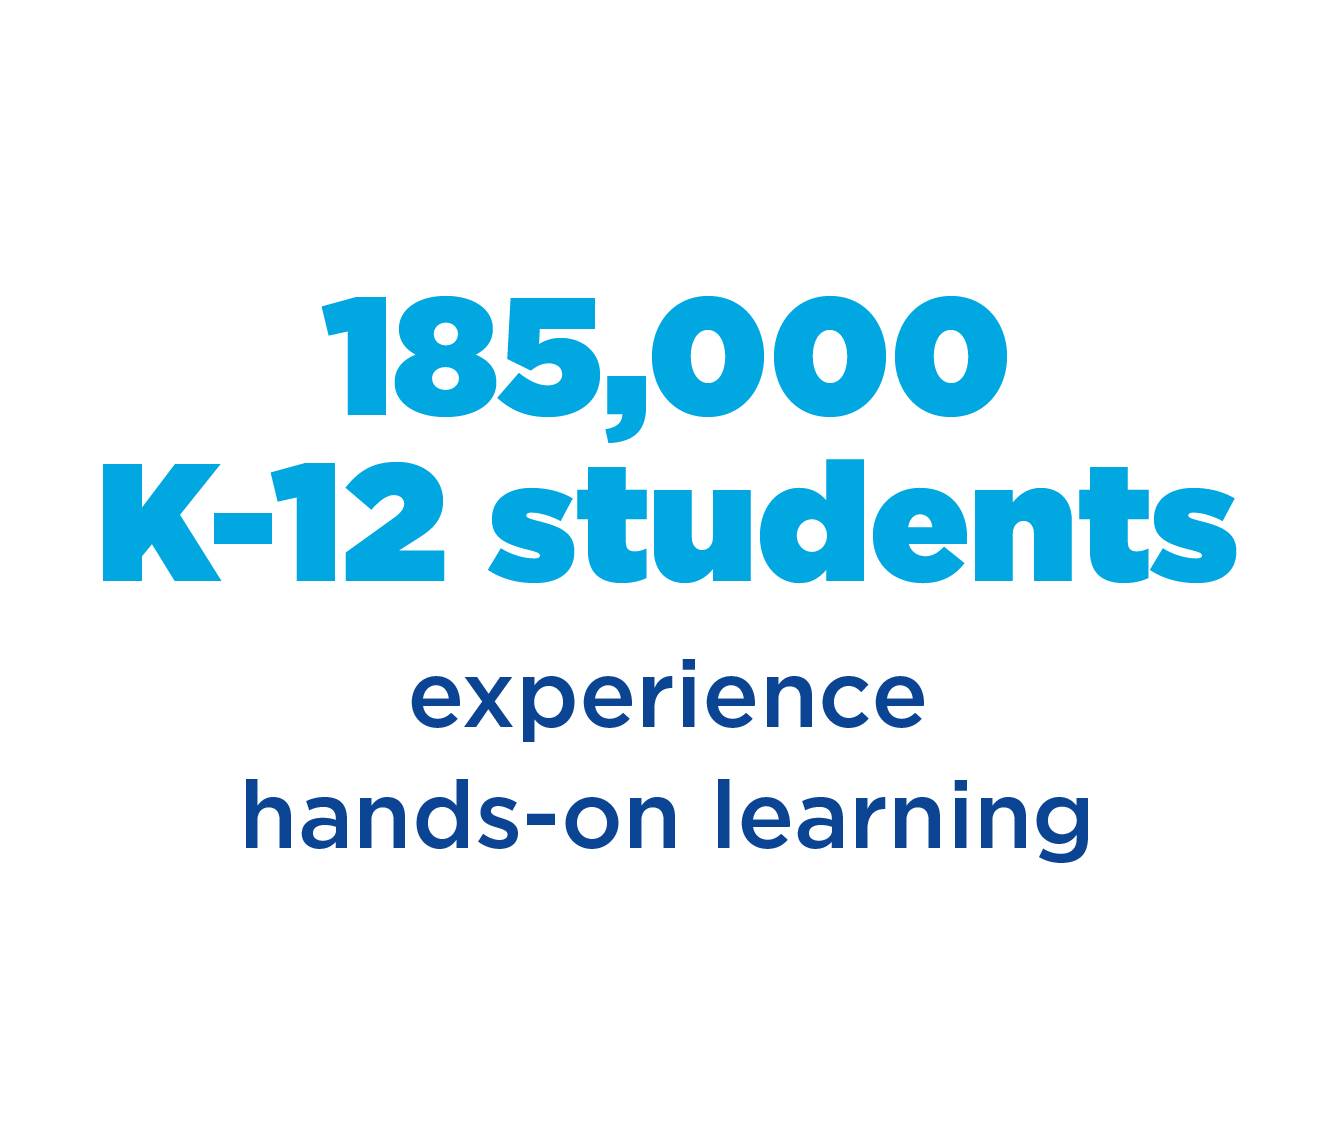 185,00 k-12 students experience hands-on learning